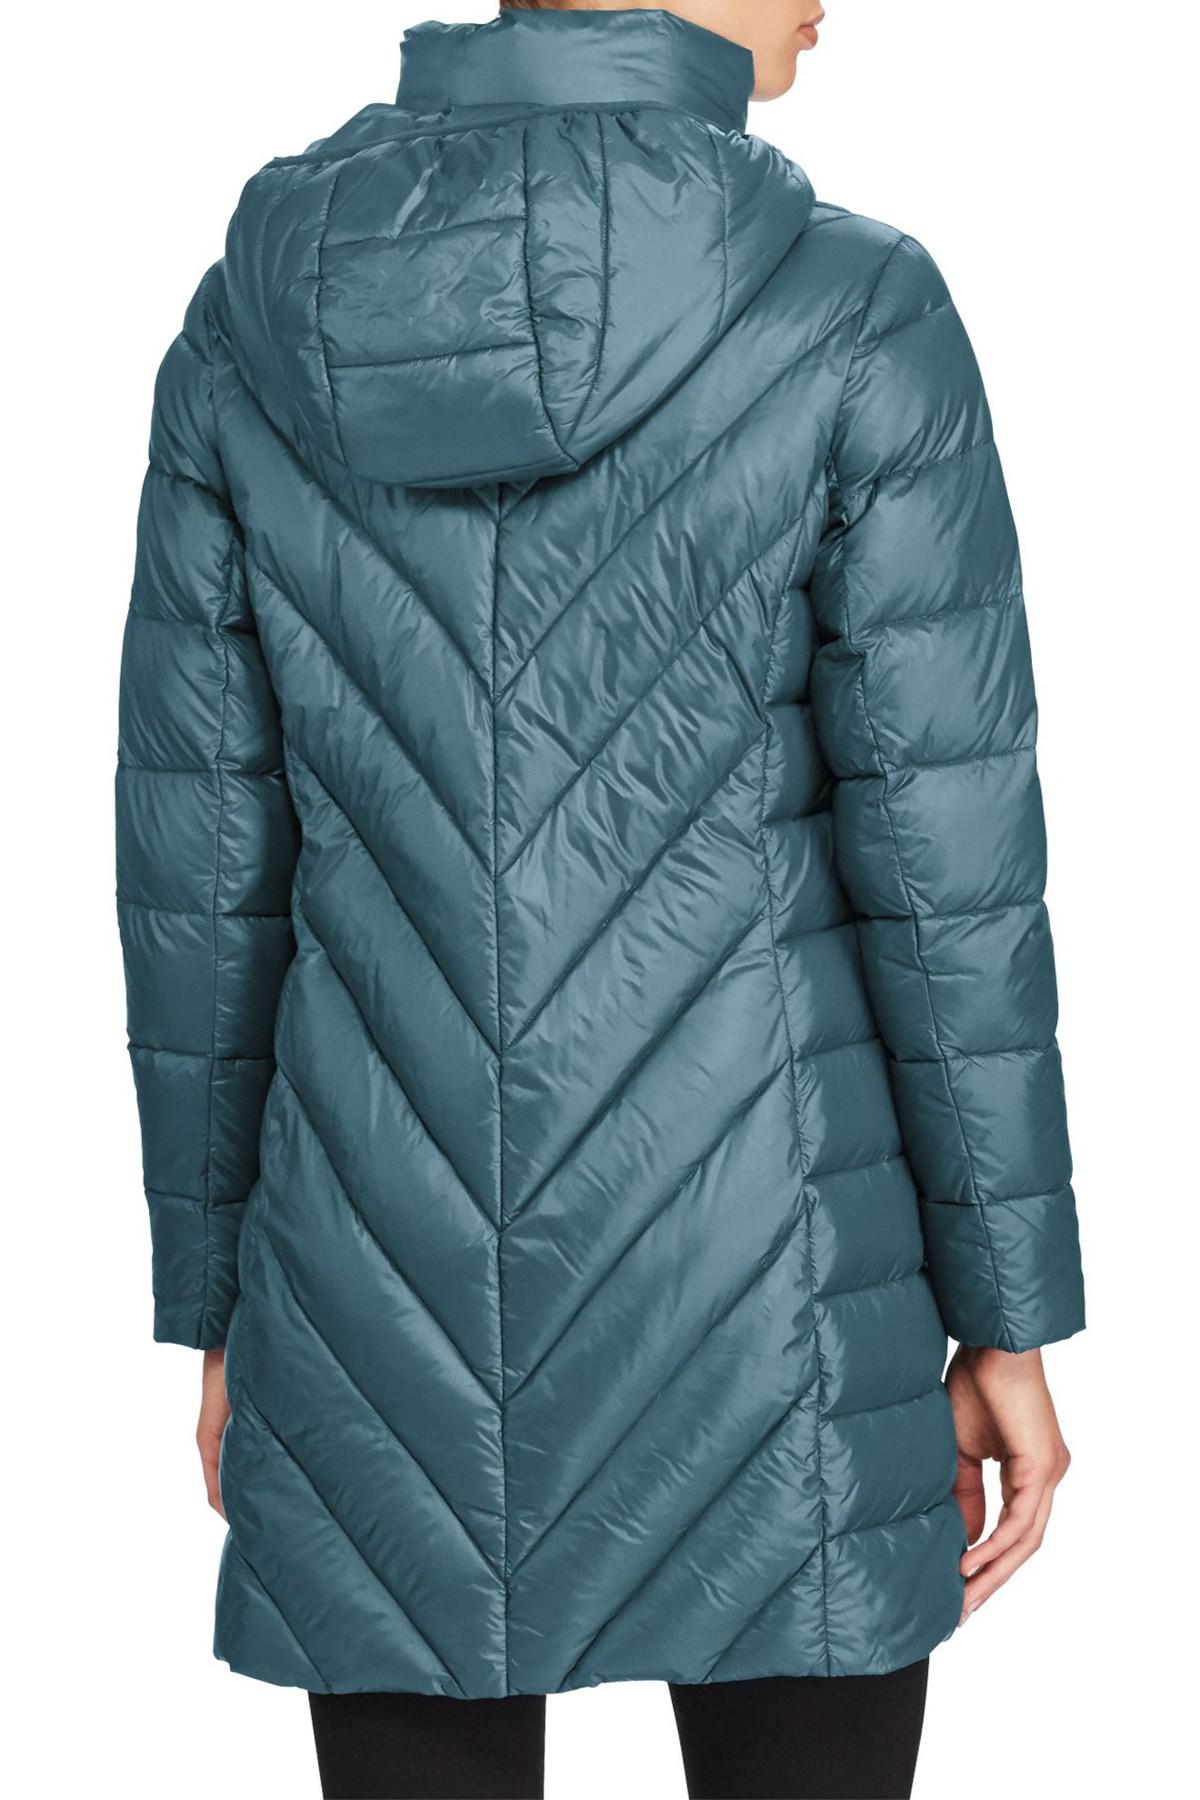 Marks and ralph lauren quilted down jacket, Olive green puffer jacket mens, latest long dress design 2019. 